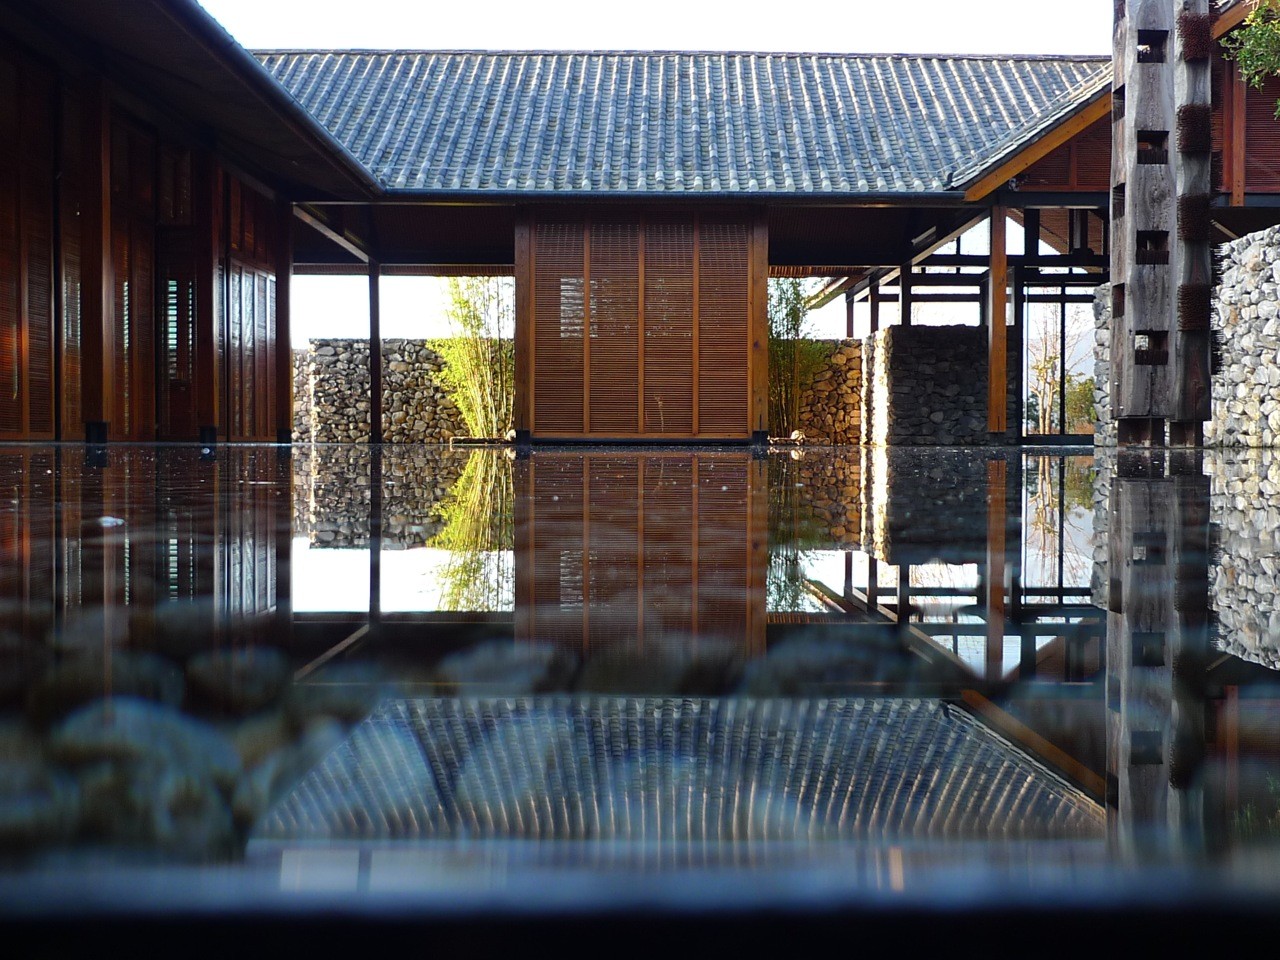 Interior view of the Water House by Lijang, China